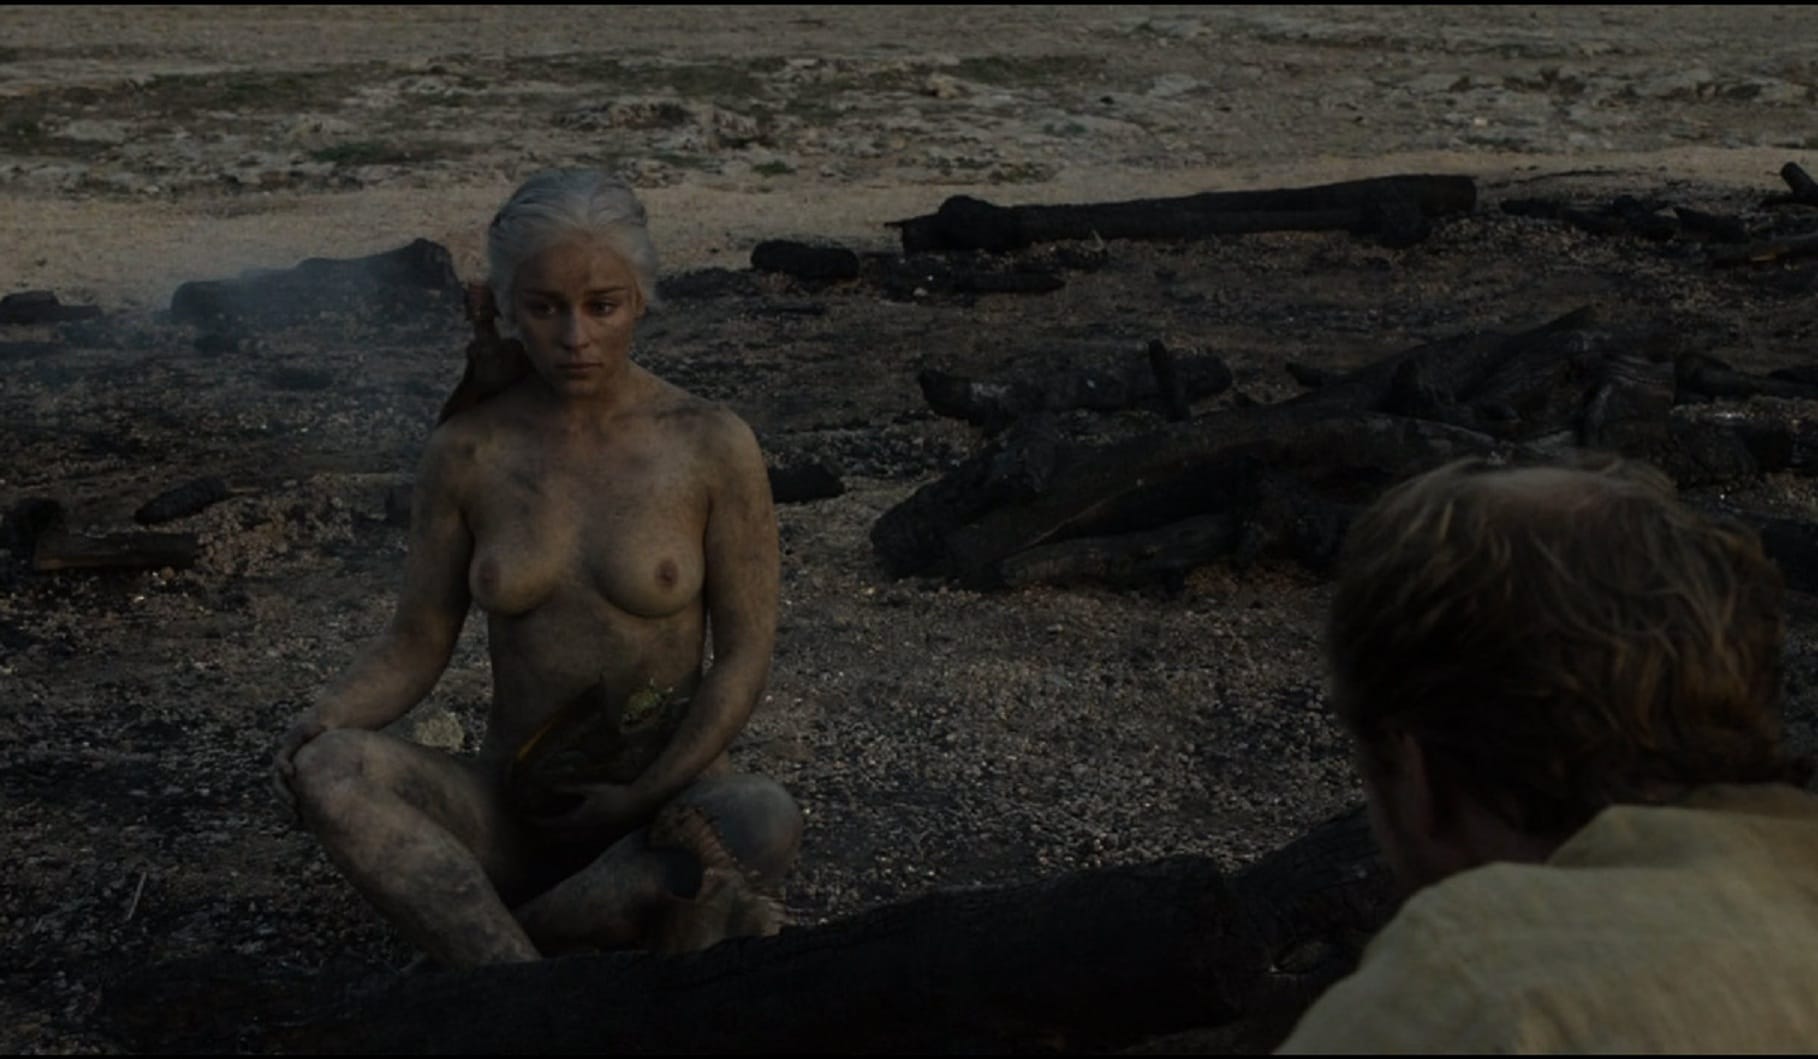 Emilia Clarke sitting down nude covered in ash